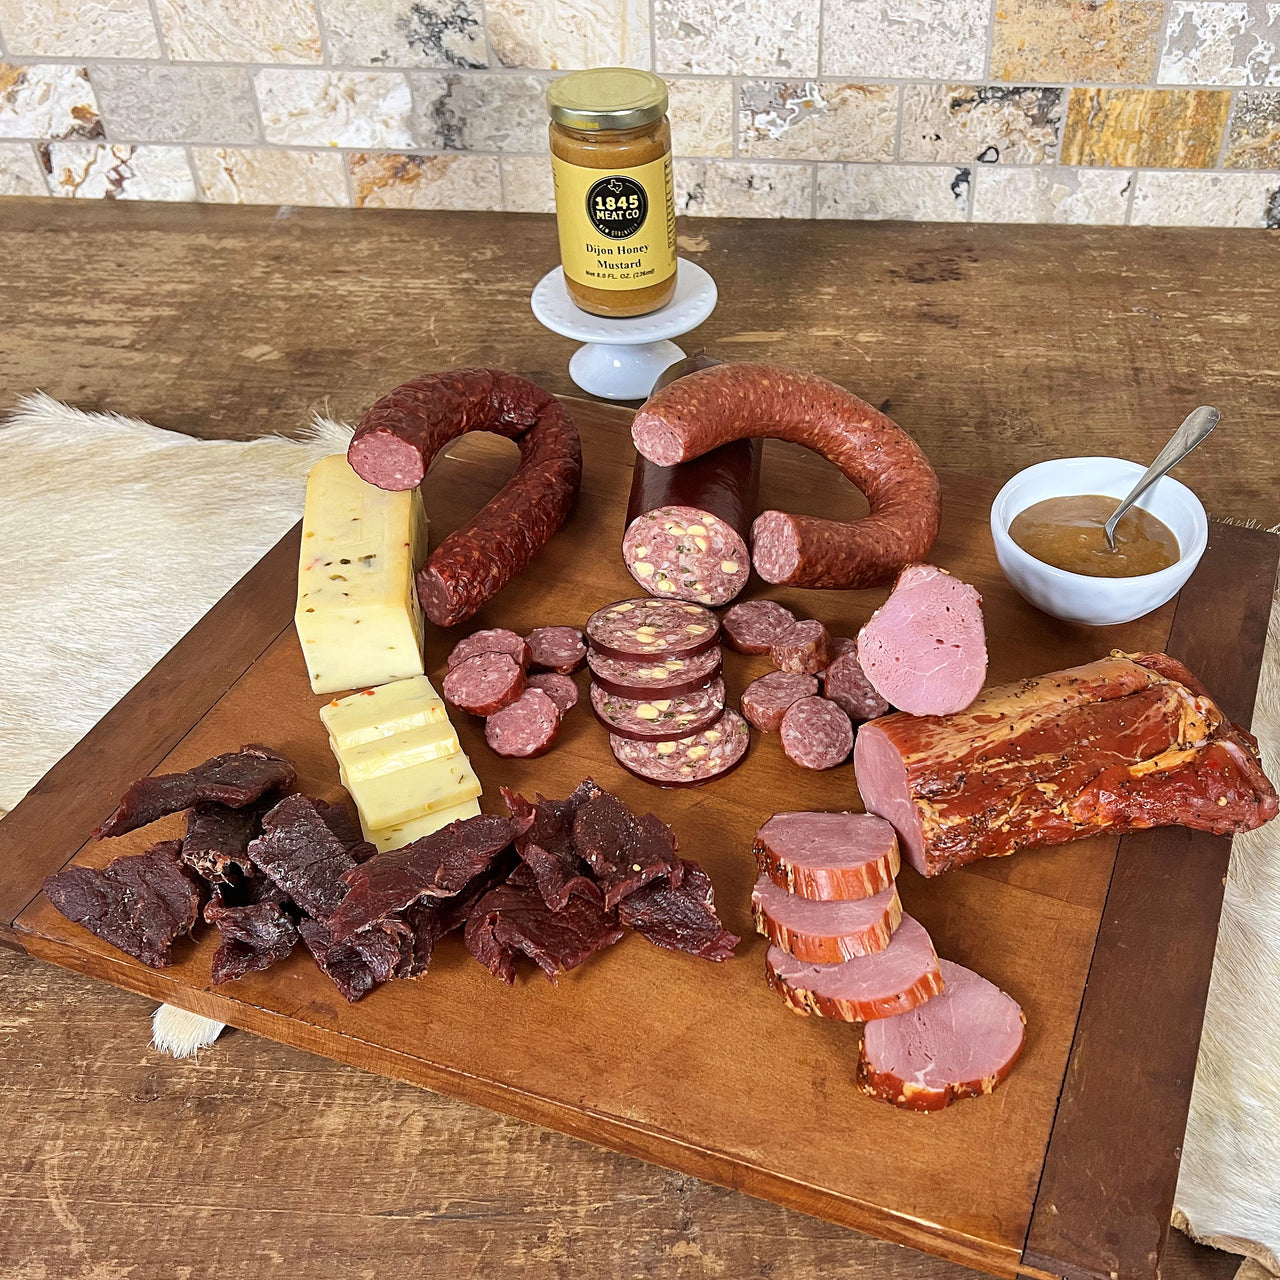 A great collection of items for when friends come over for the evening.  Includes:  16 oz. of Pork Tenderloin 8 oz. Dietert Family Pork & Beef Ring Sausage 8 oz. Tays Family Venison & Pork Ring Sausage 12 oz. of Cheddar Jalapeno Summer Sausage 8 oz. Smoked Pepper Jack Cheese 3 oz. of BBQ Seasoned Beef Jerky  8 oz. Jar of Honey Dijon Mustard ﻿Item #15E